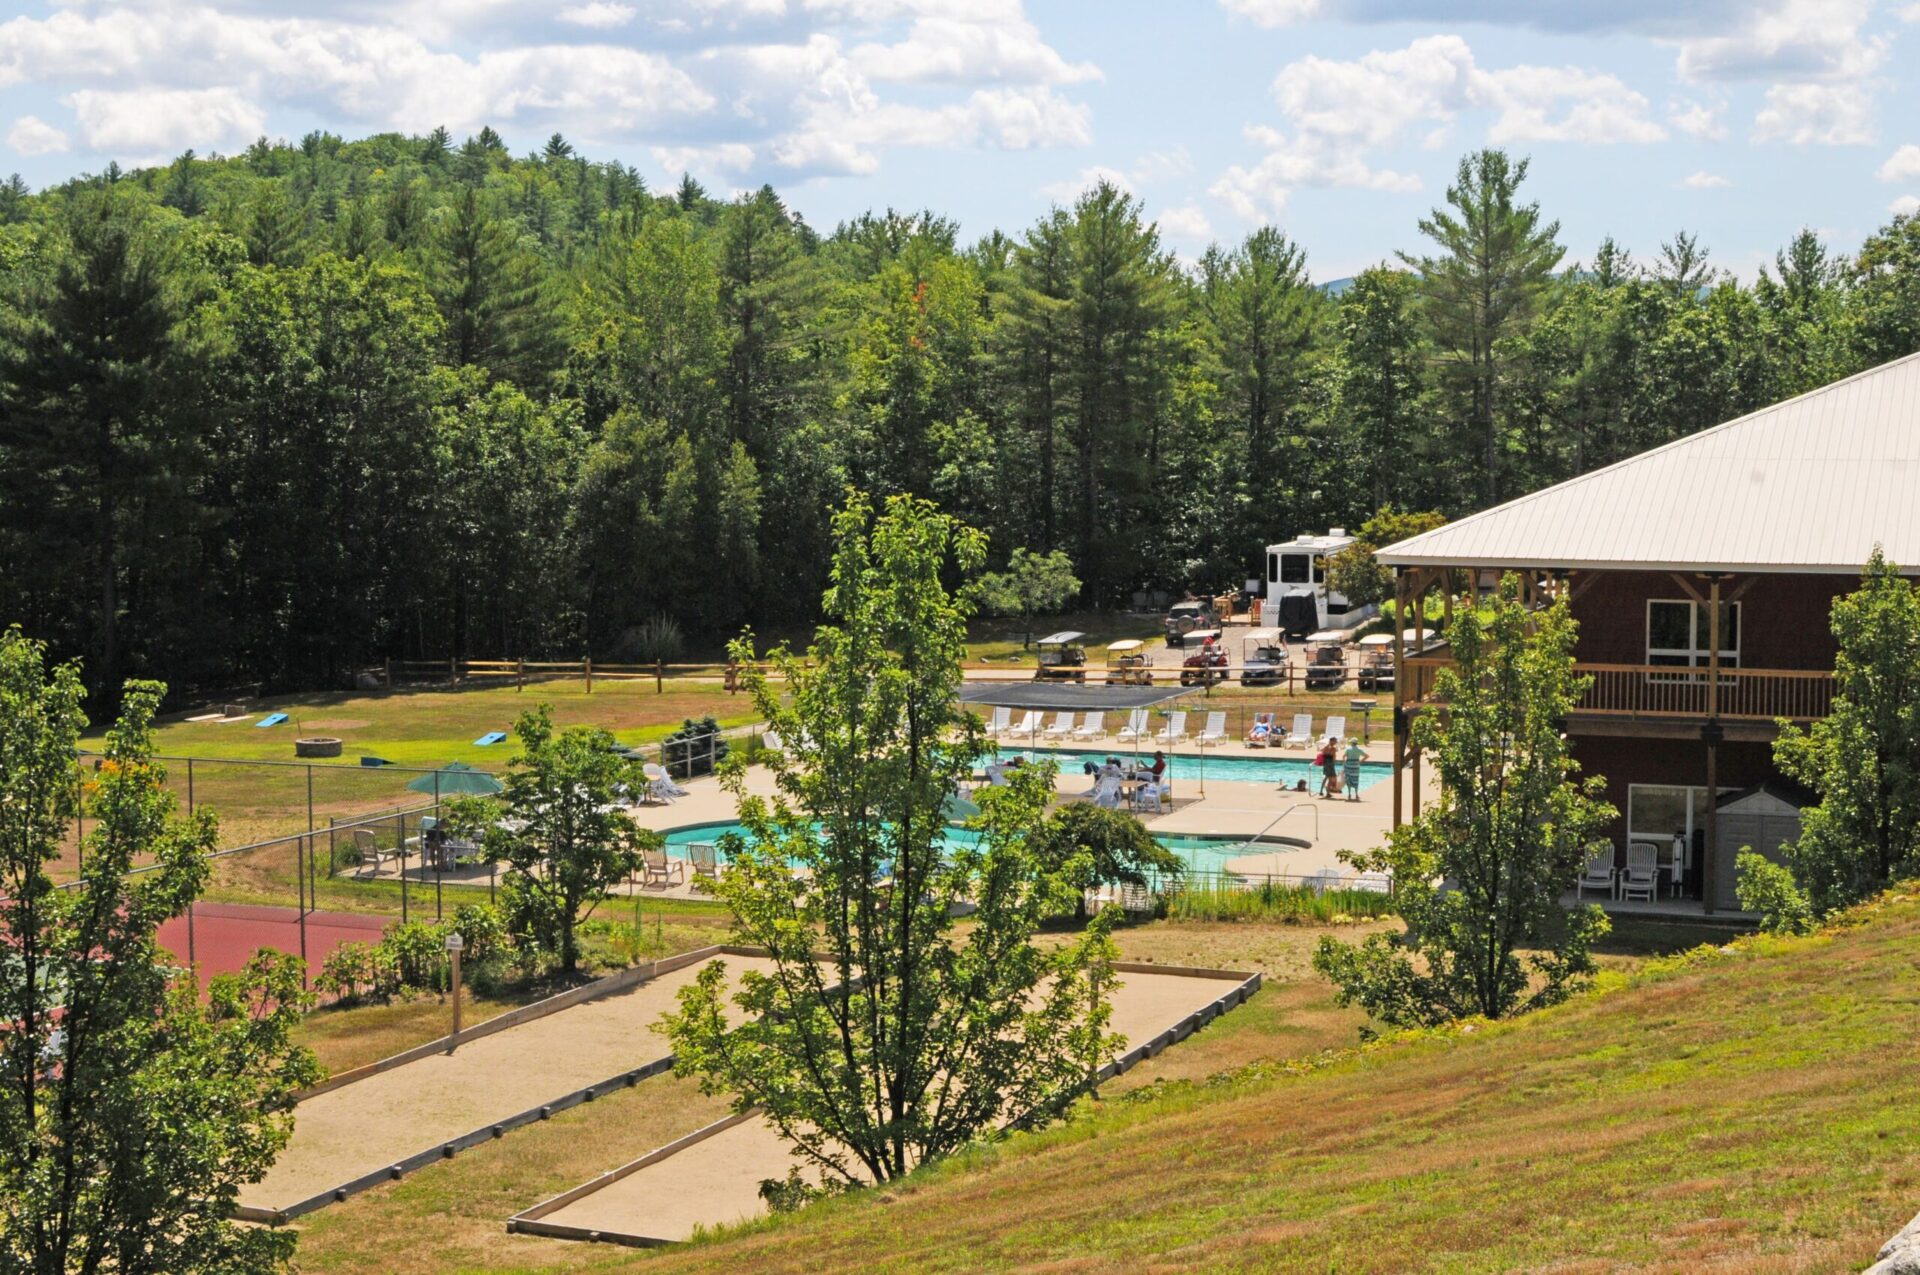 A Community of Active-Adult Campers